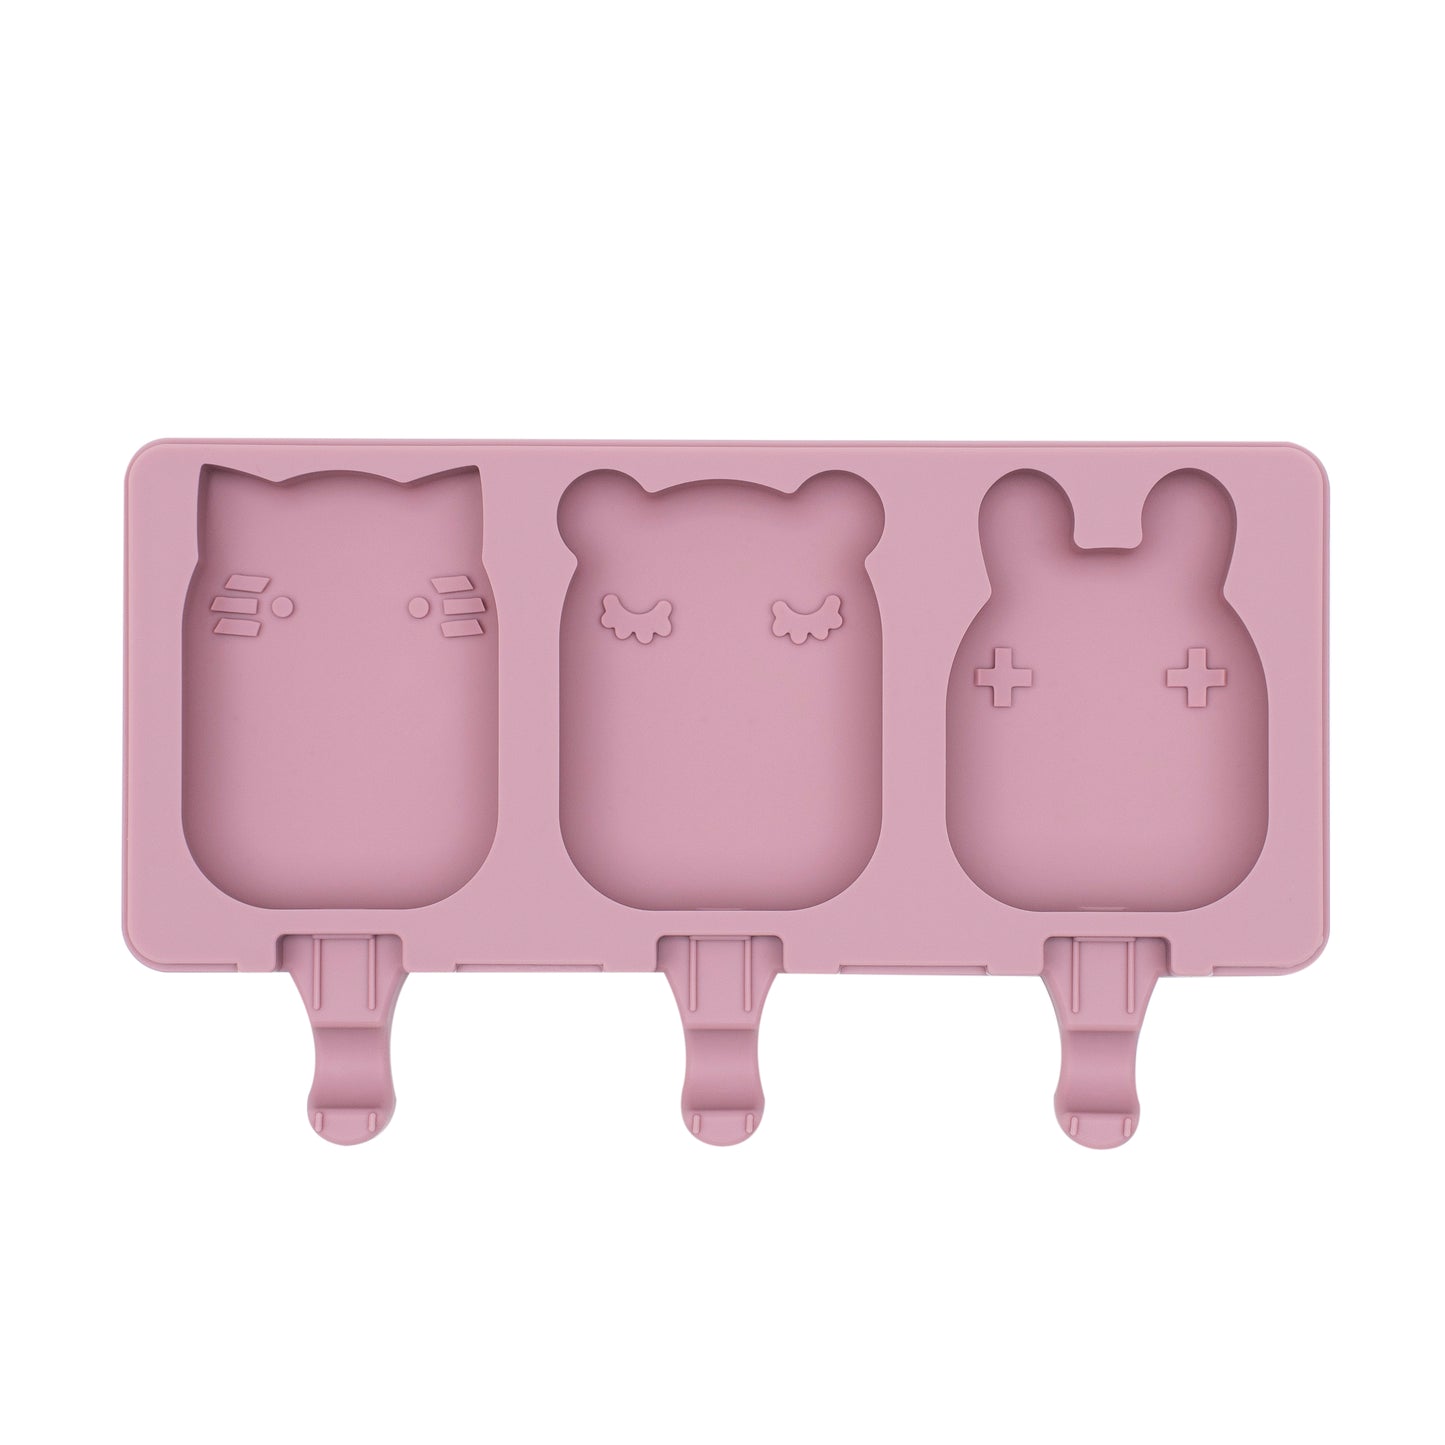 Icy Pole Mould - Frosties